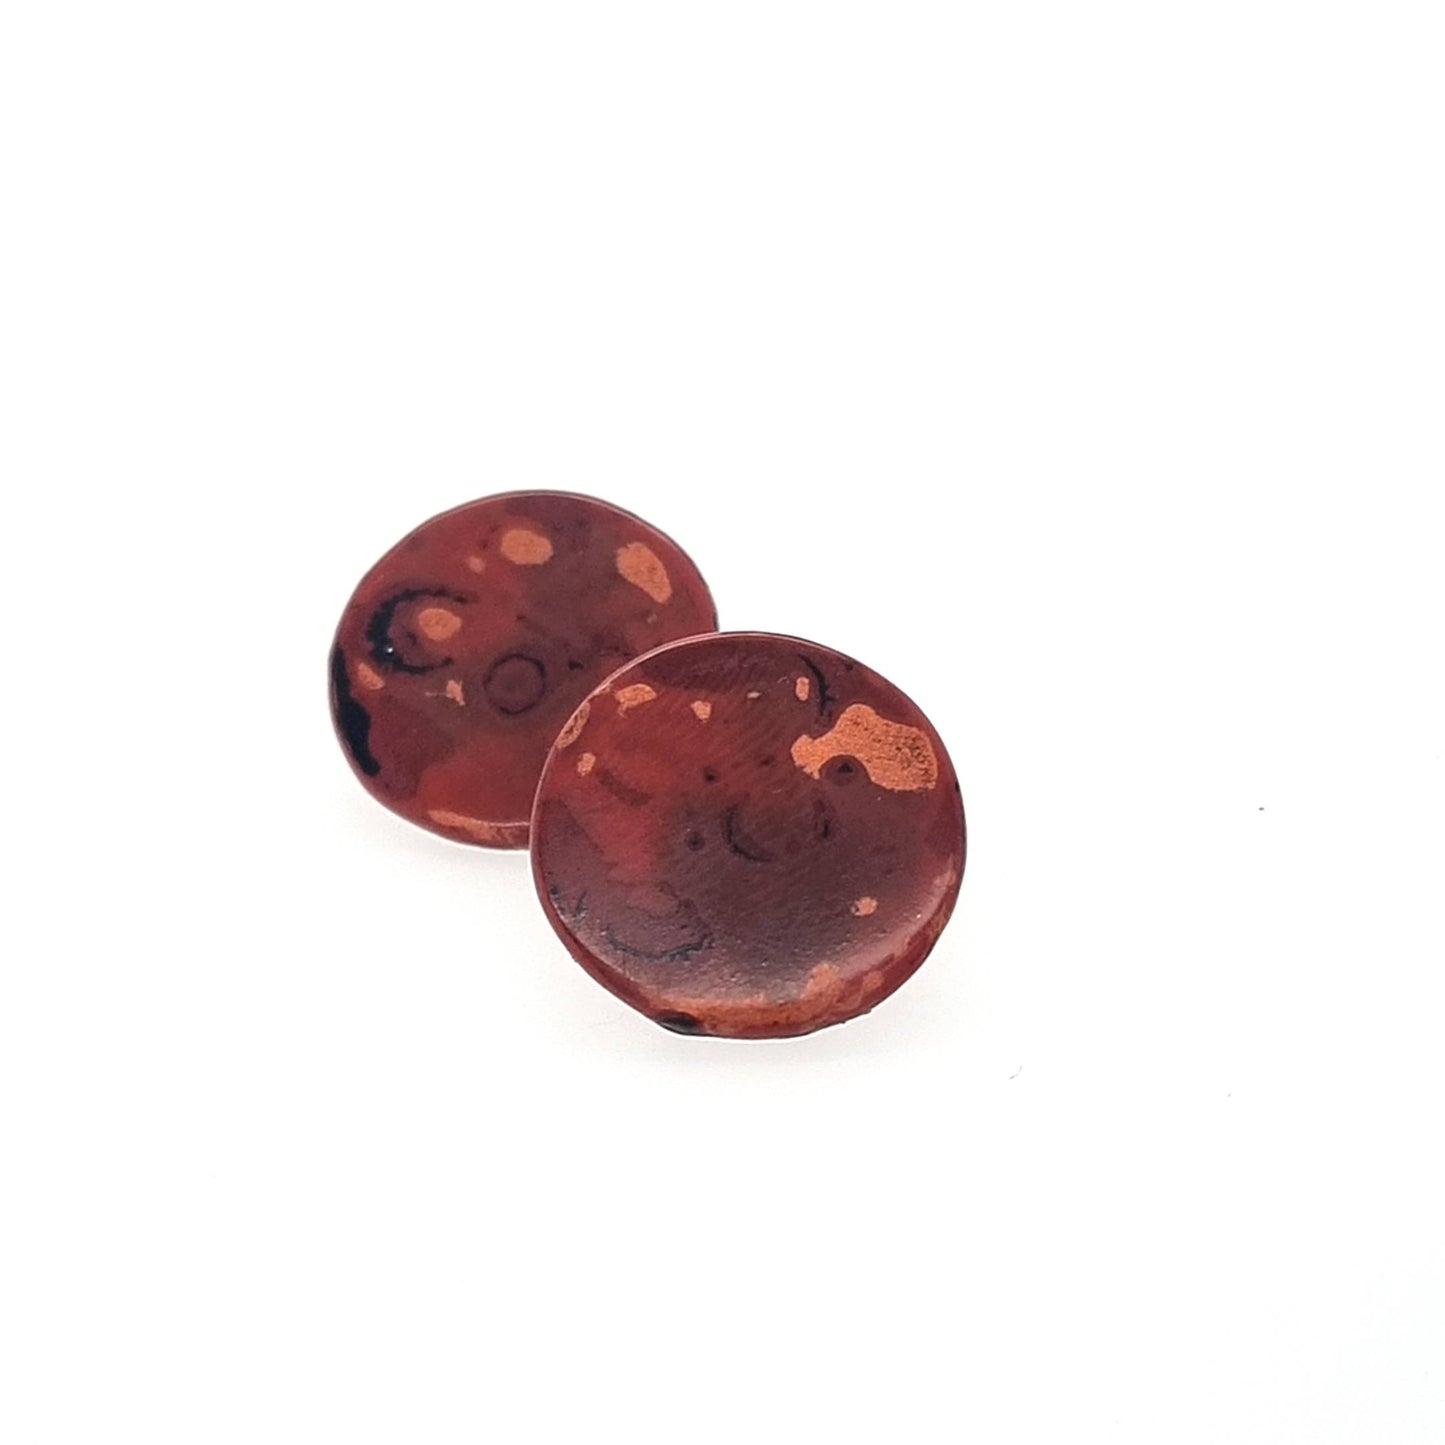 Mini Tambo stud earring in reds and copper